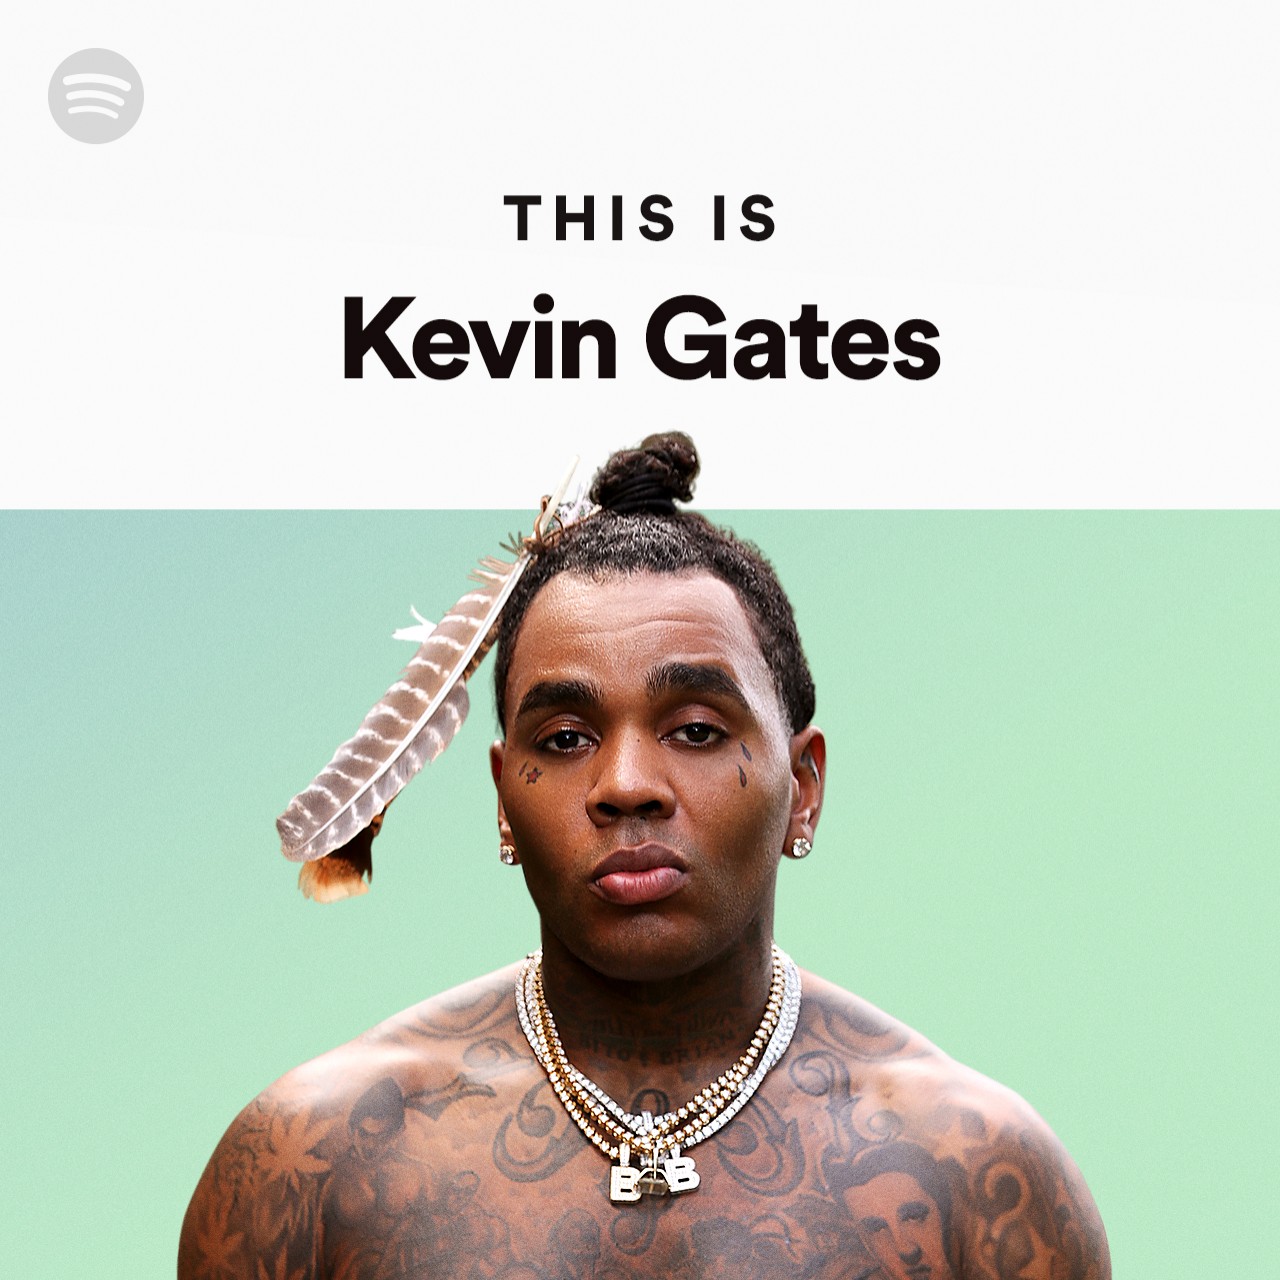 This is Kevin Gates. 